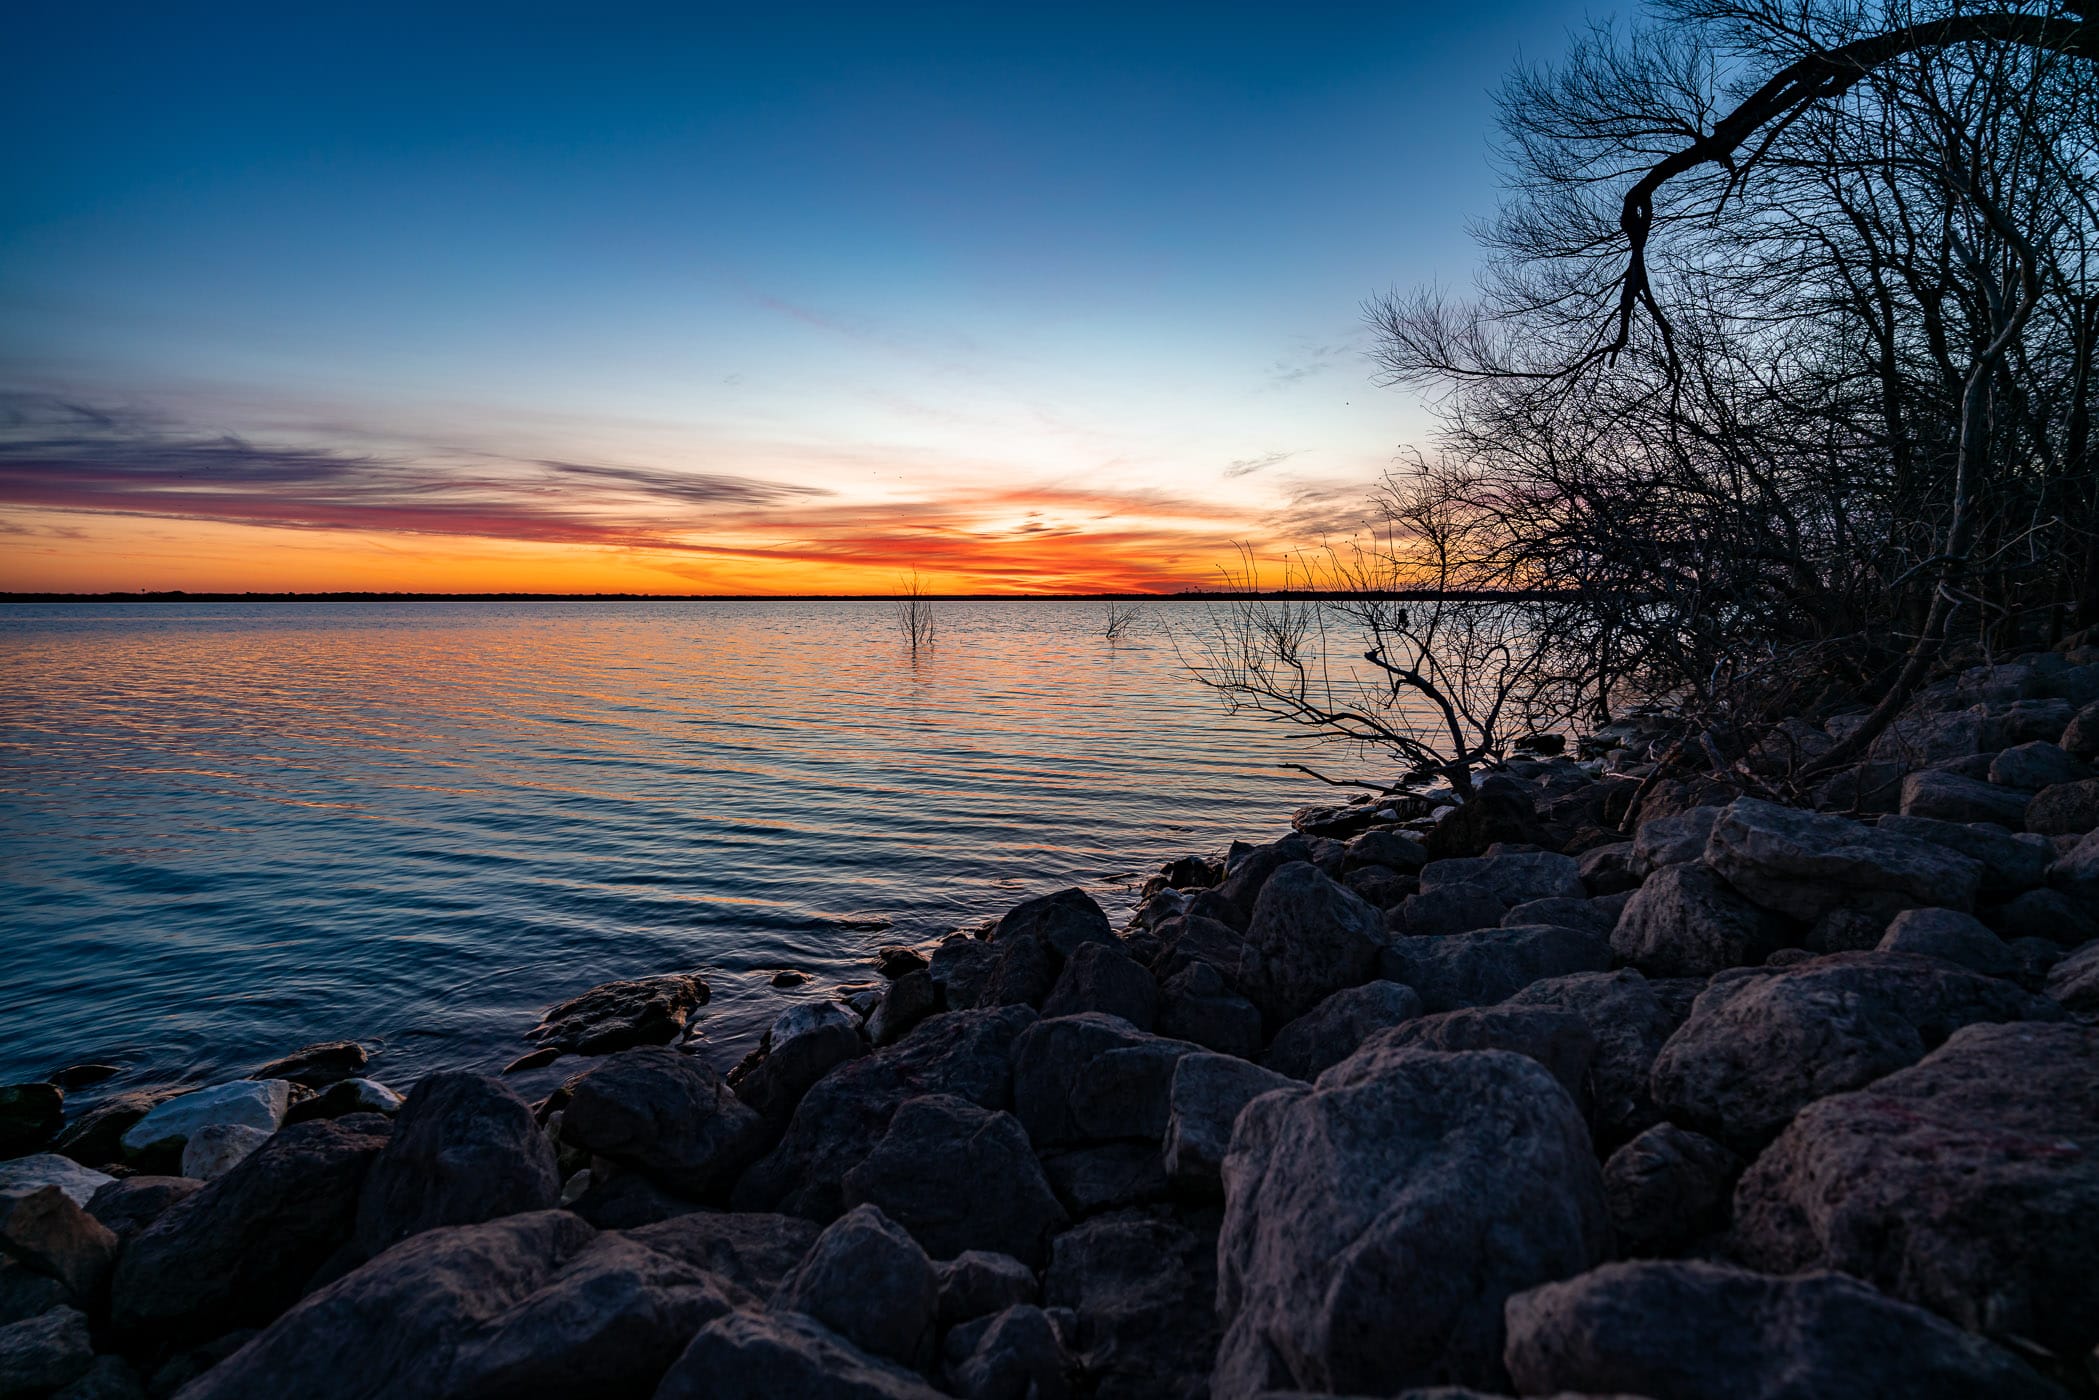 First light on North Texas' Lake Lavon.